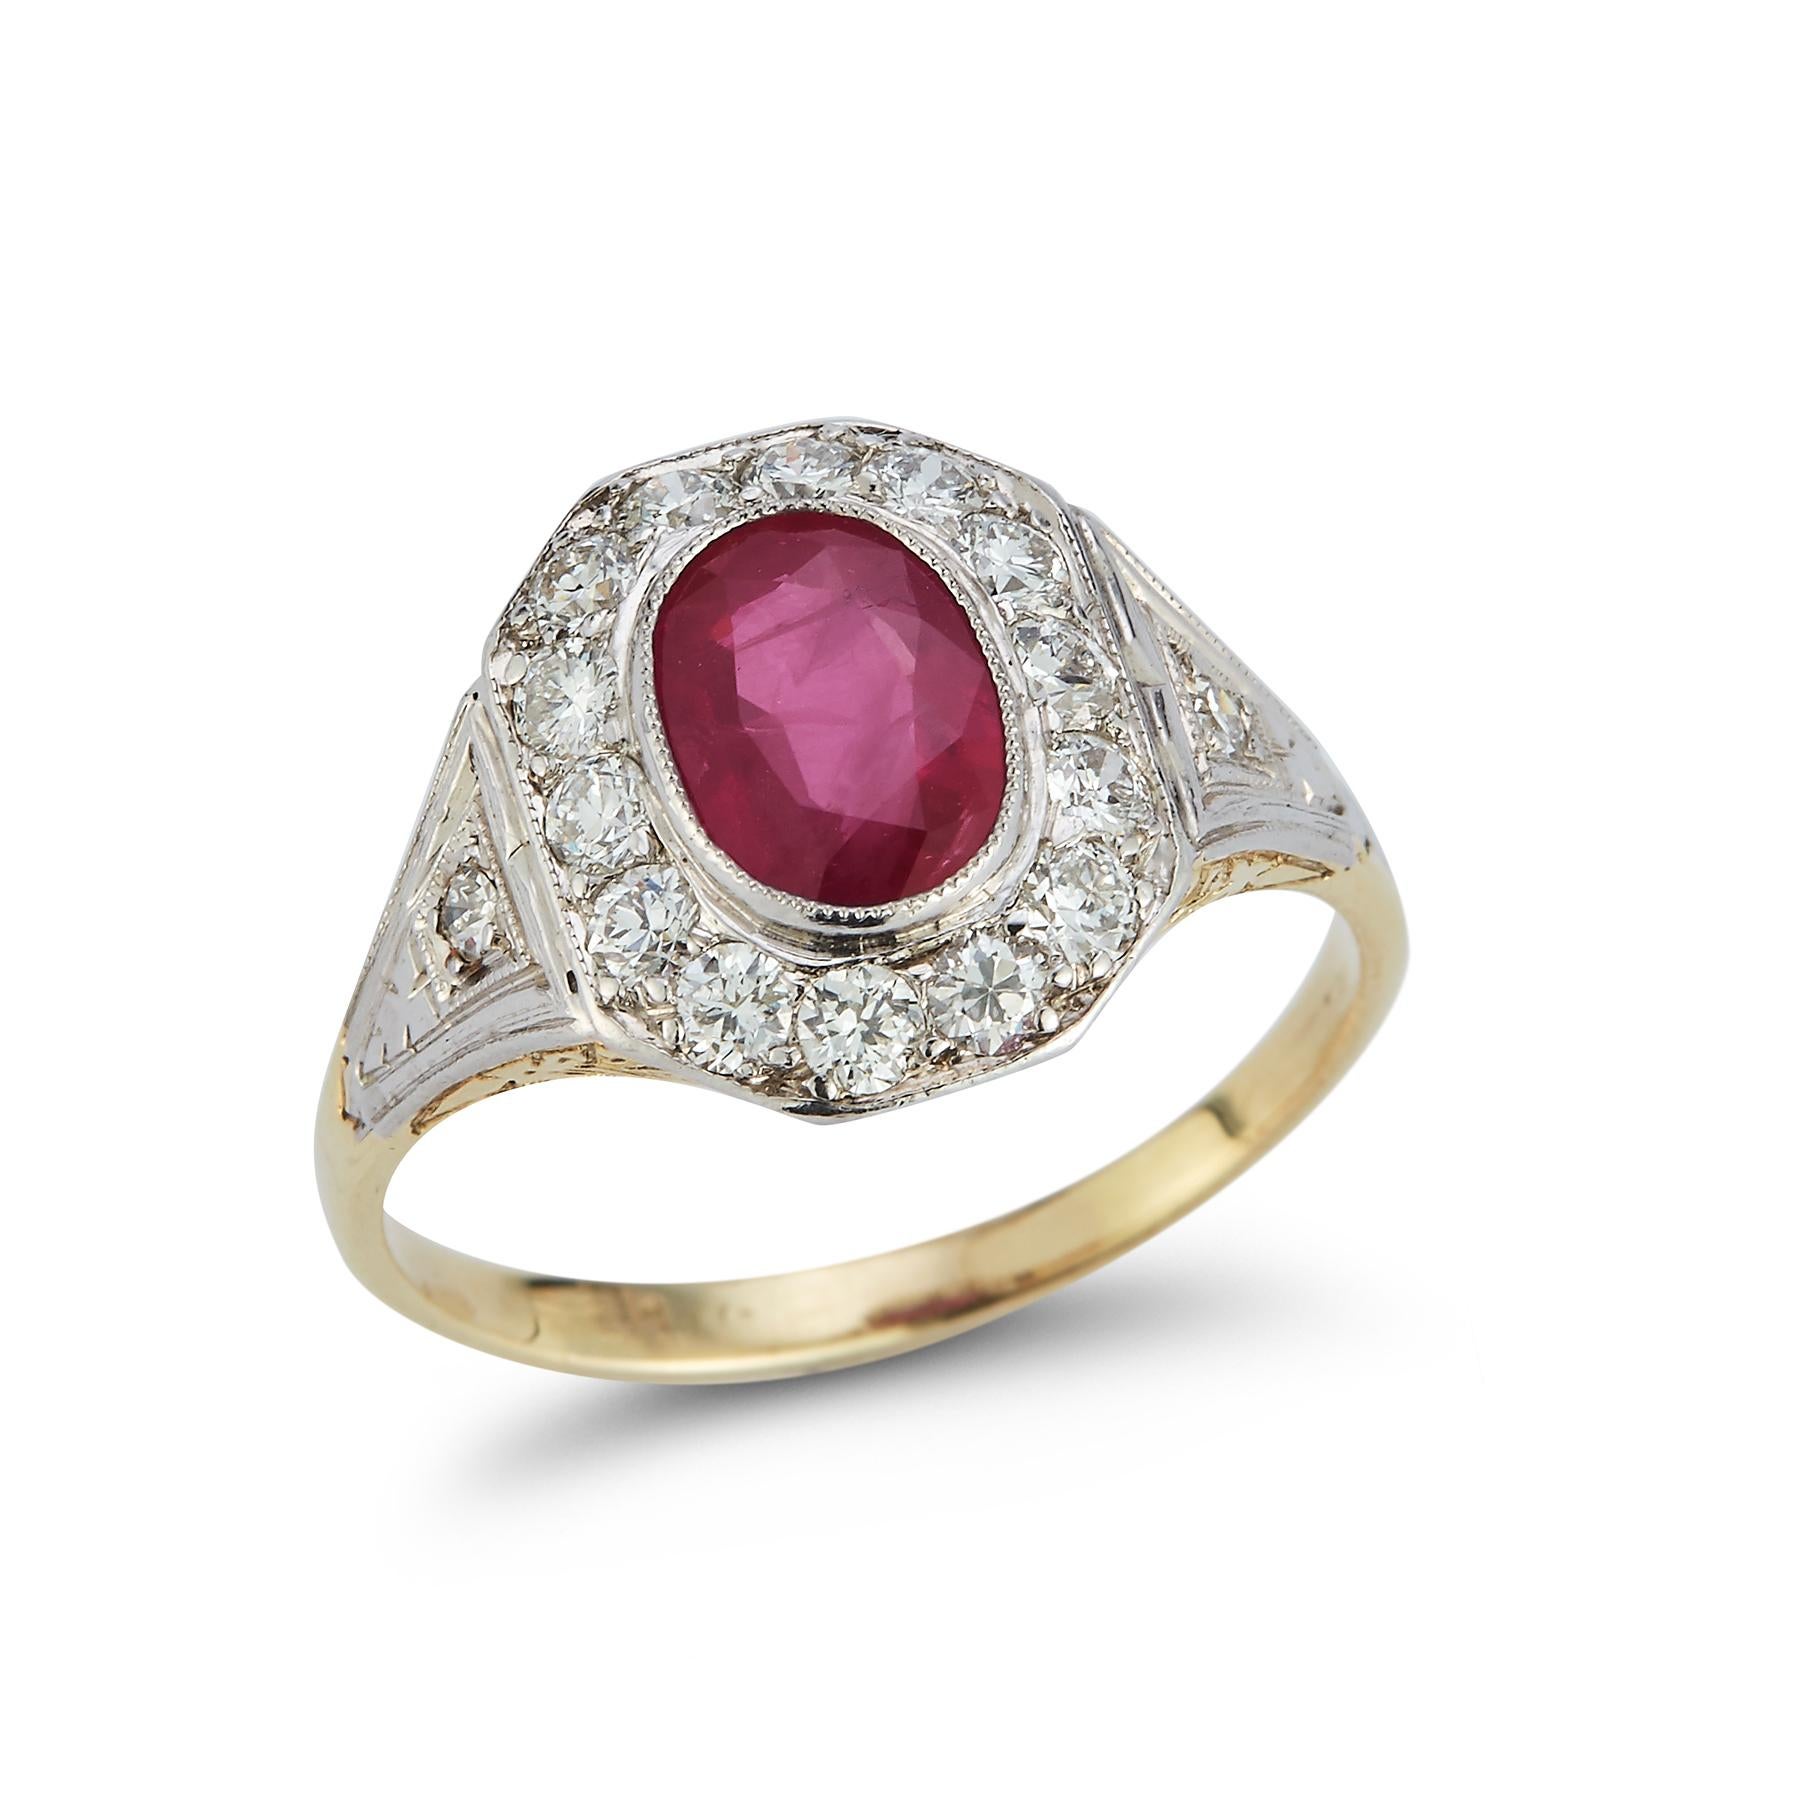  Certified Ruby & Diamond Ring

Ruby Weight: approximately 1.74 cts 

Diamond Weight:  approximately .84 cts 

Ring Size: 7.25

Re sizable free of charge 

Gold Type: 14K Yellow Gold 
